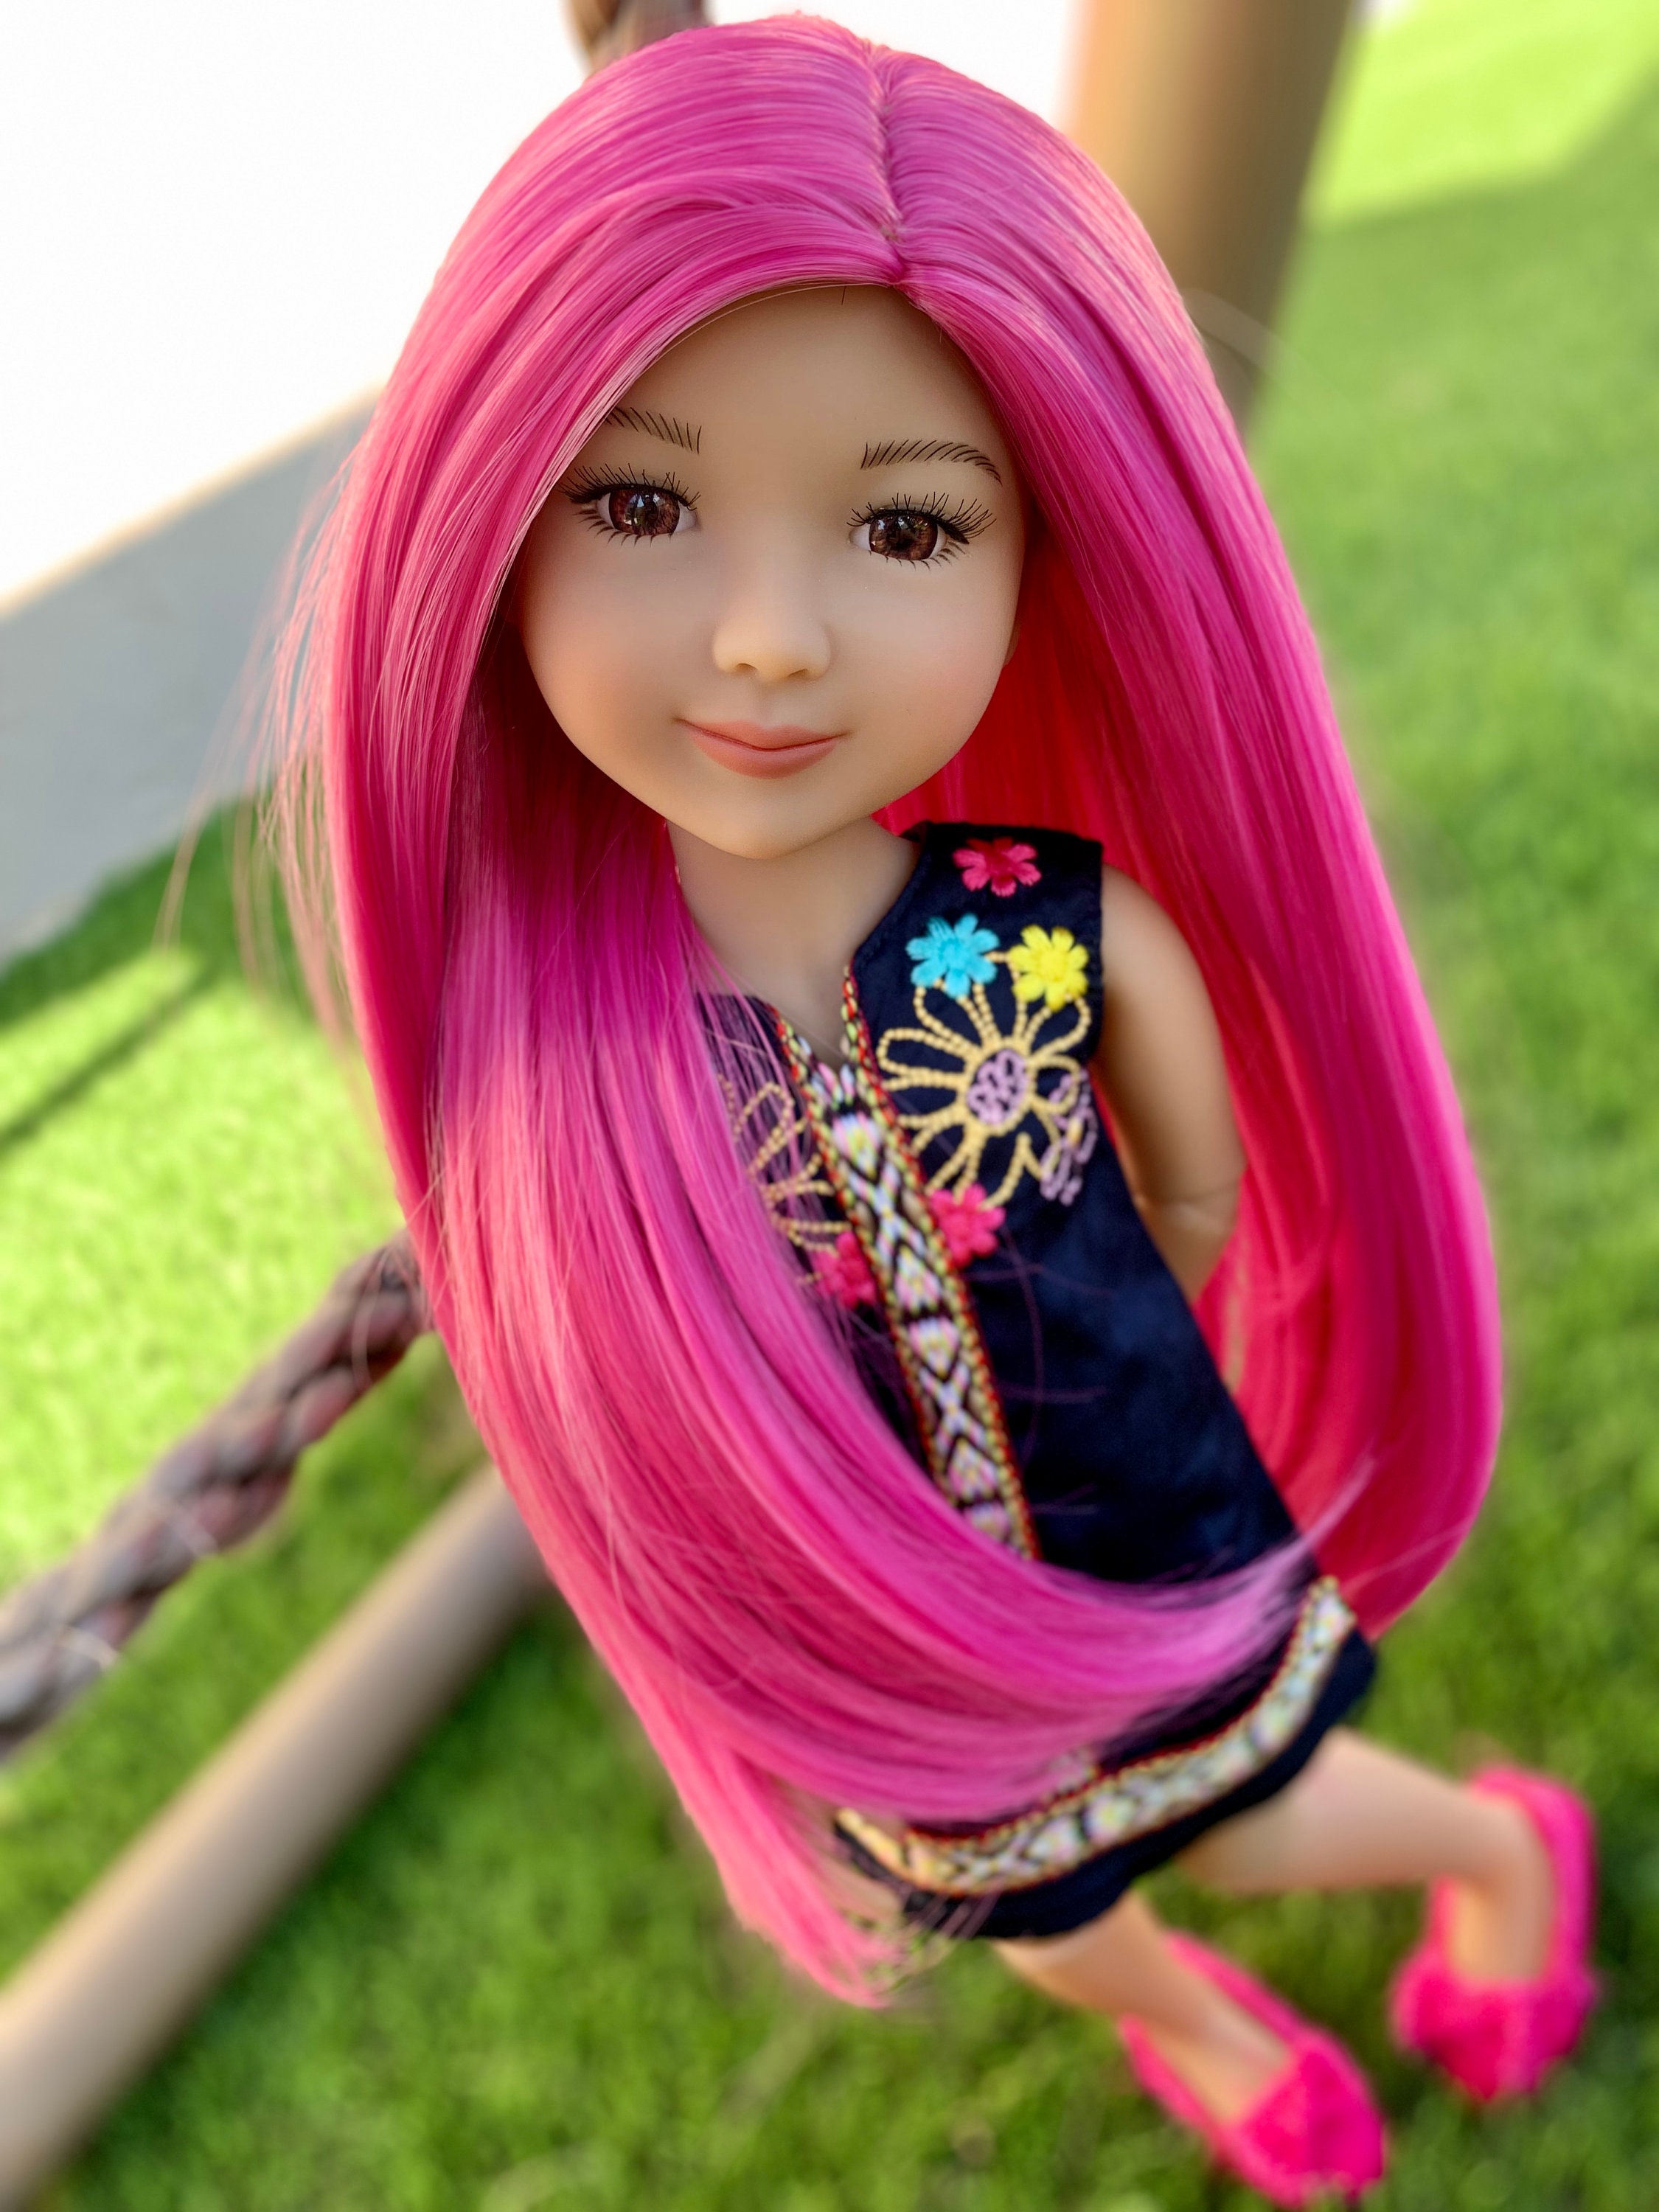 How to straighten the doll's hair - step by step tutorial - Margaret Ann